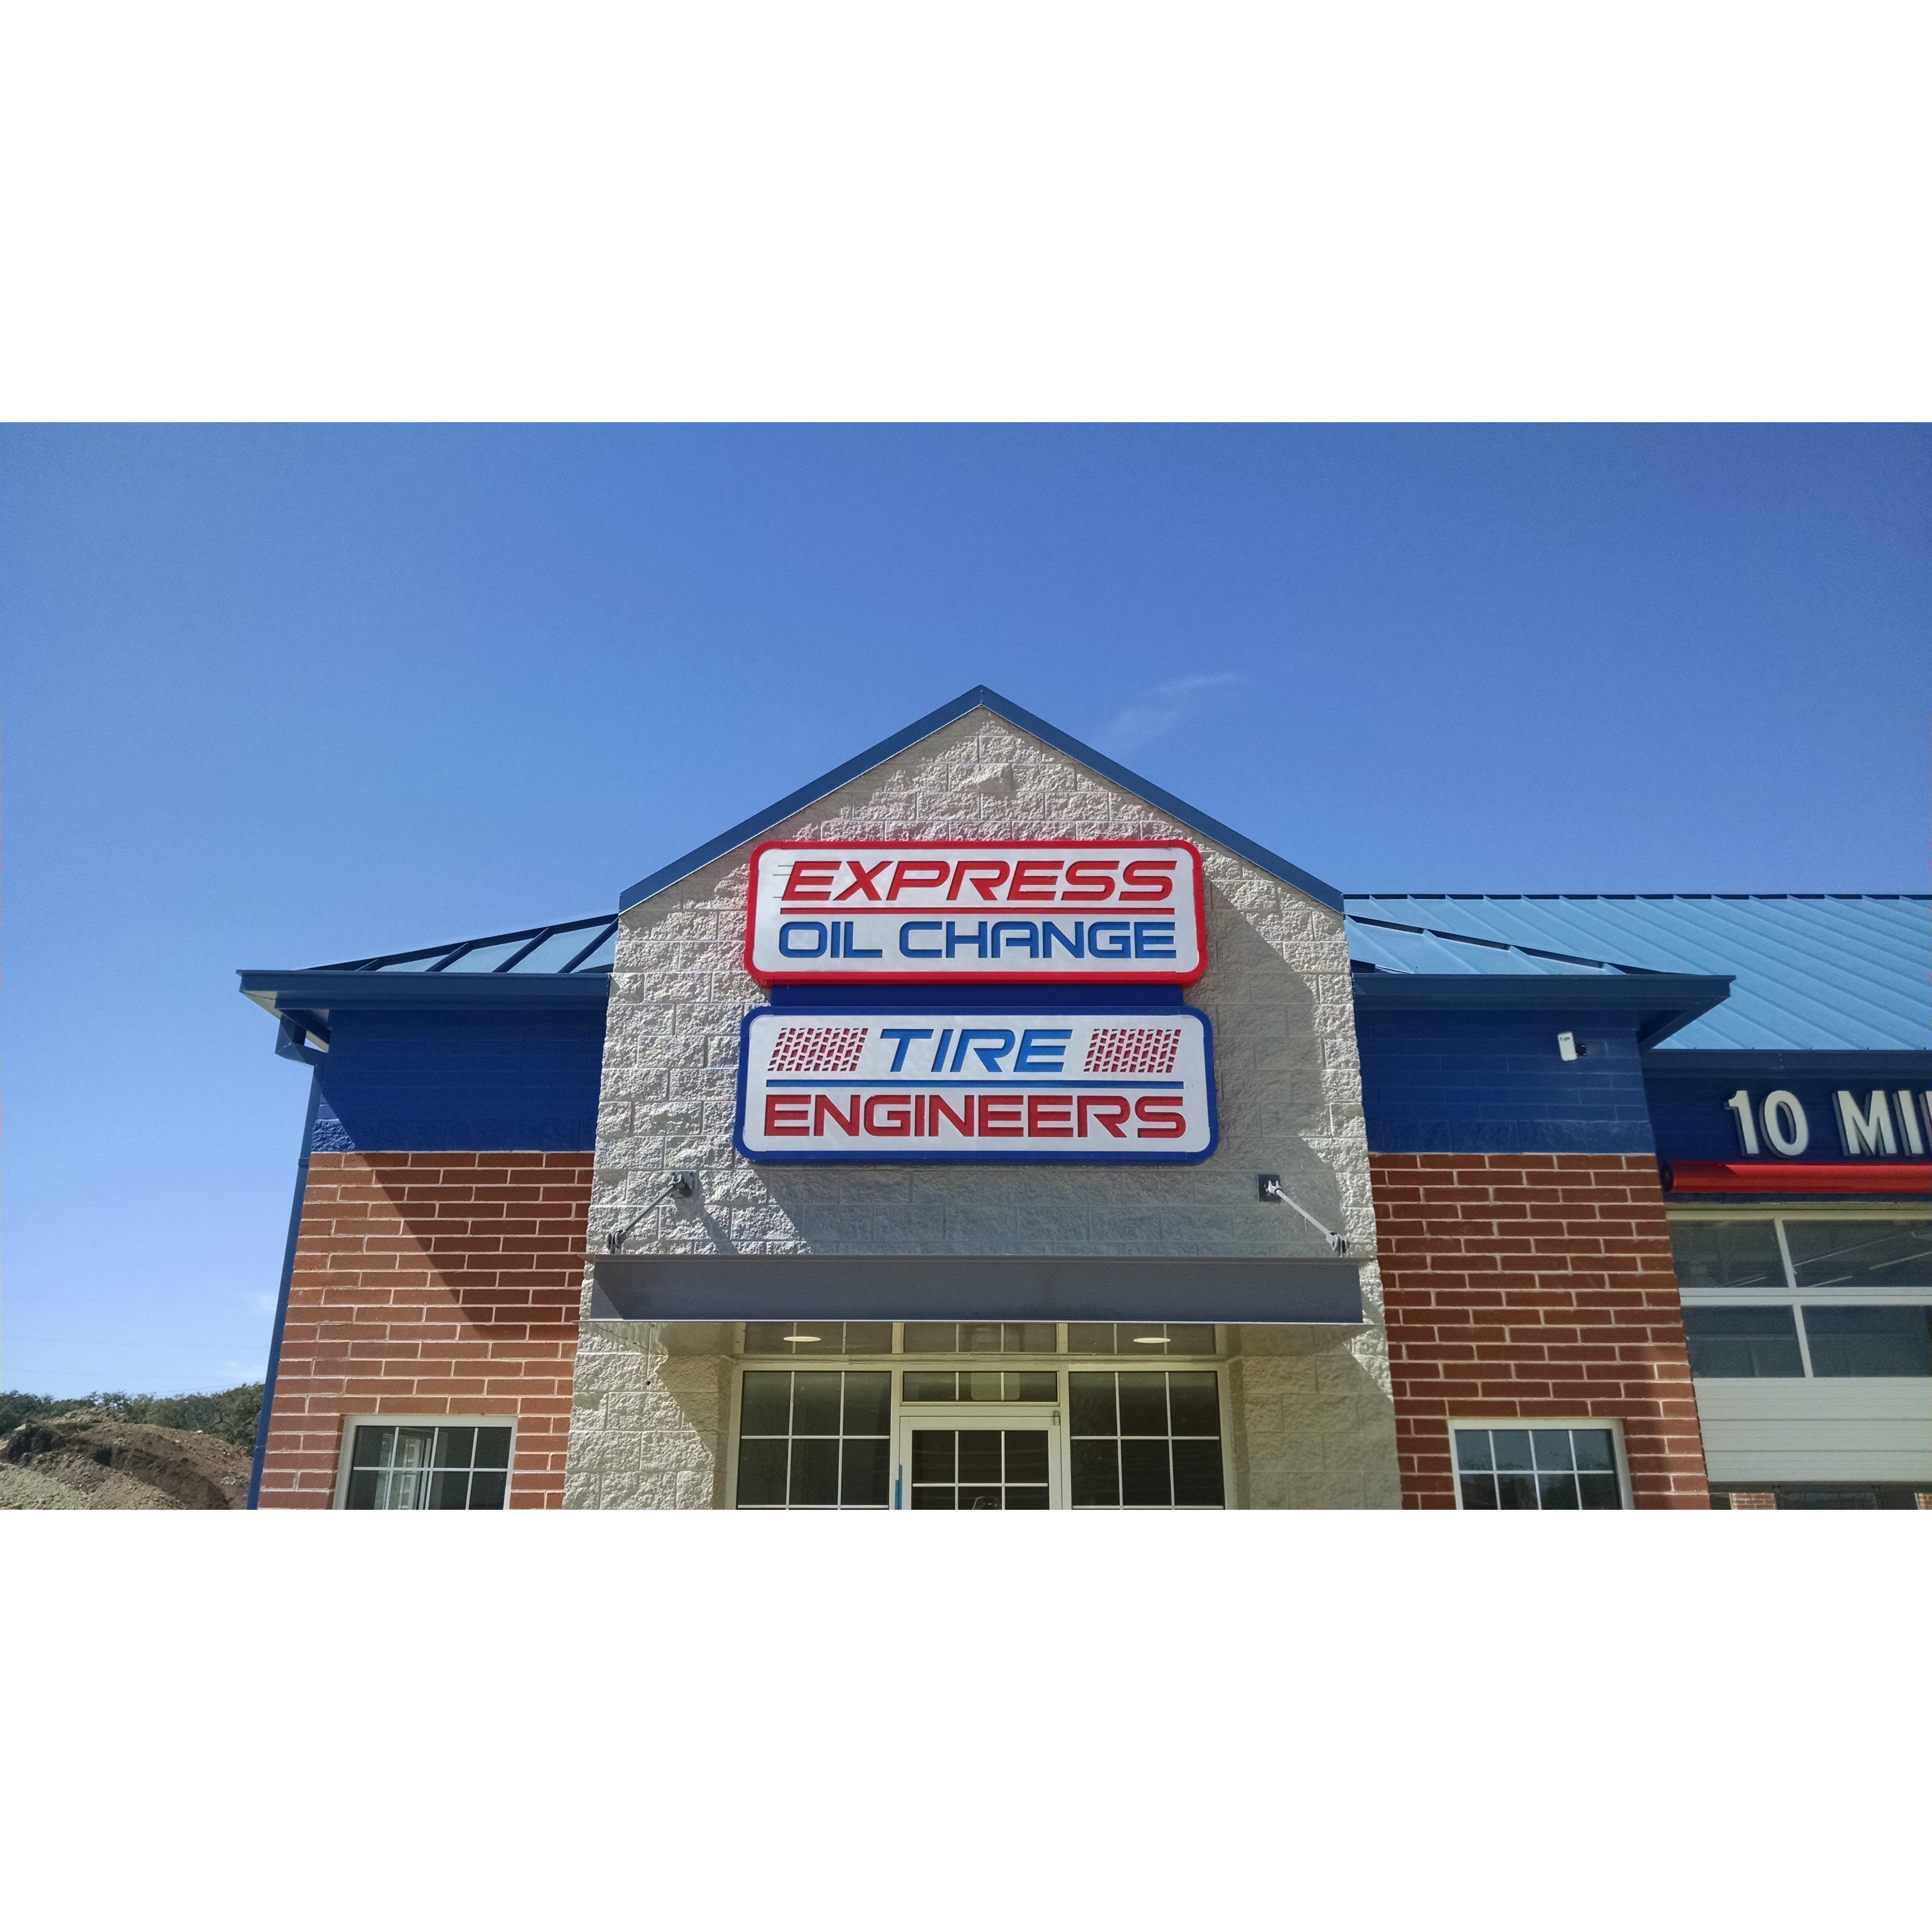 Express Oil Change & Tire Engineers Service Center-Culebra Coupons near me in San Antonio | 8coupons